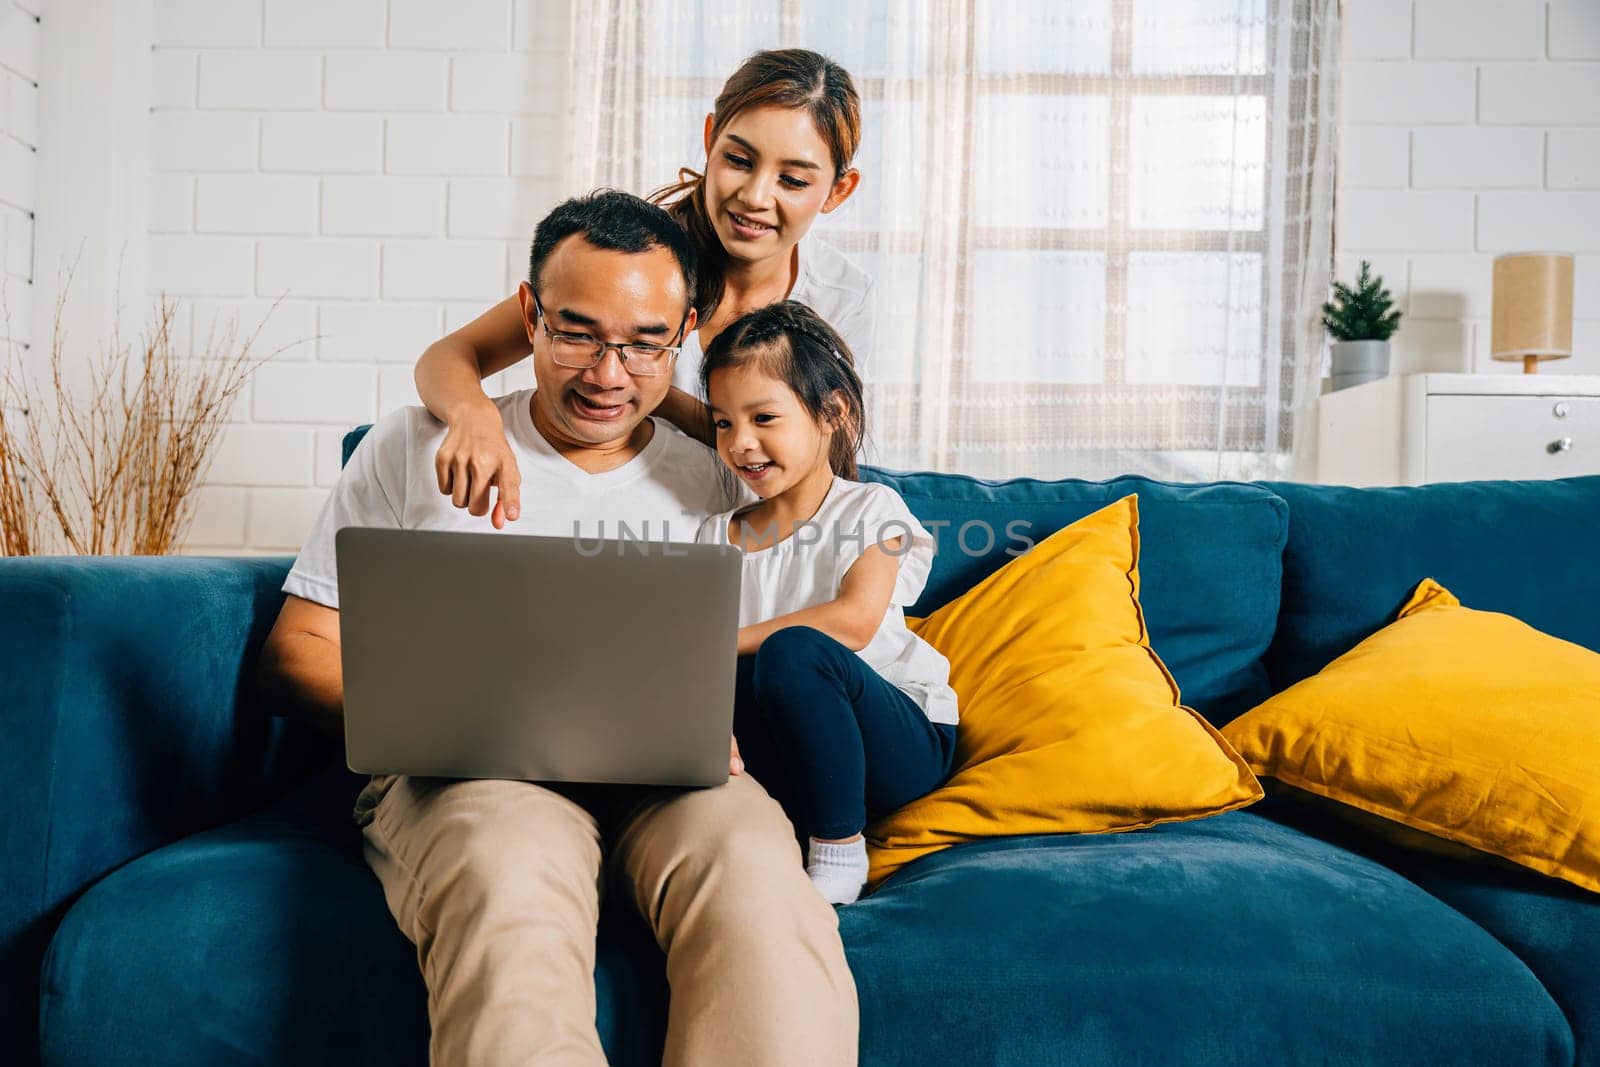 Parents and kids gathered on the couch with a laptop finding happiness in their modern family time by Sorapop